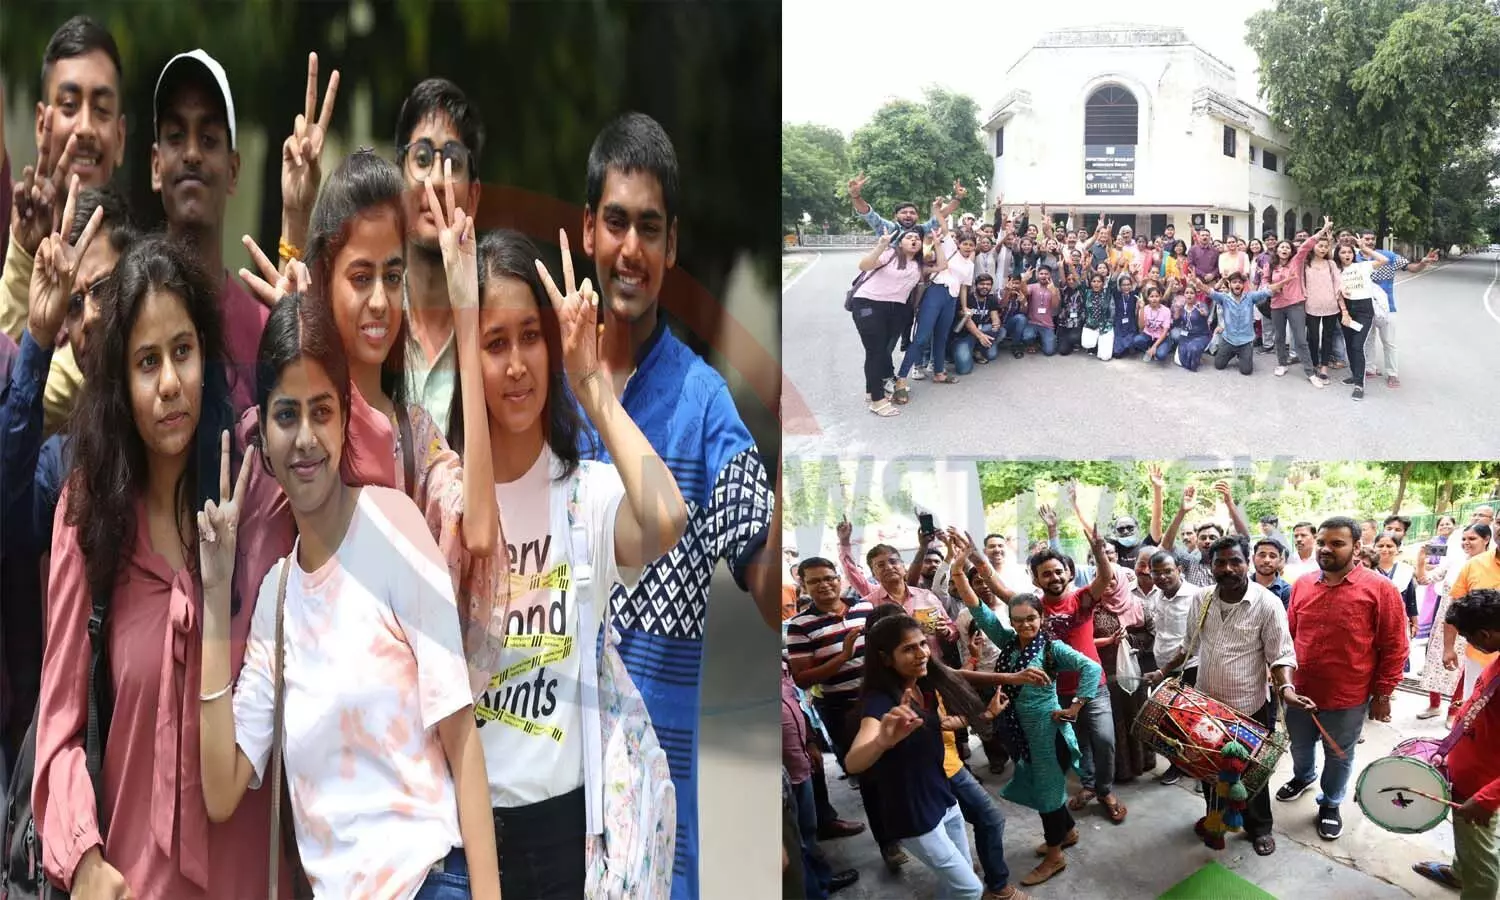 After getting A++ grade in NAAC assessment, professors and students of Lucknow University celebrated with great joy.